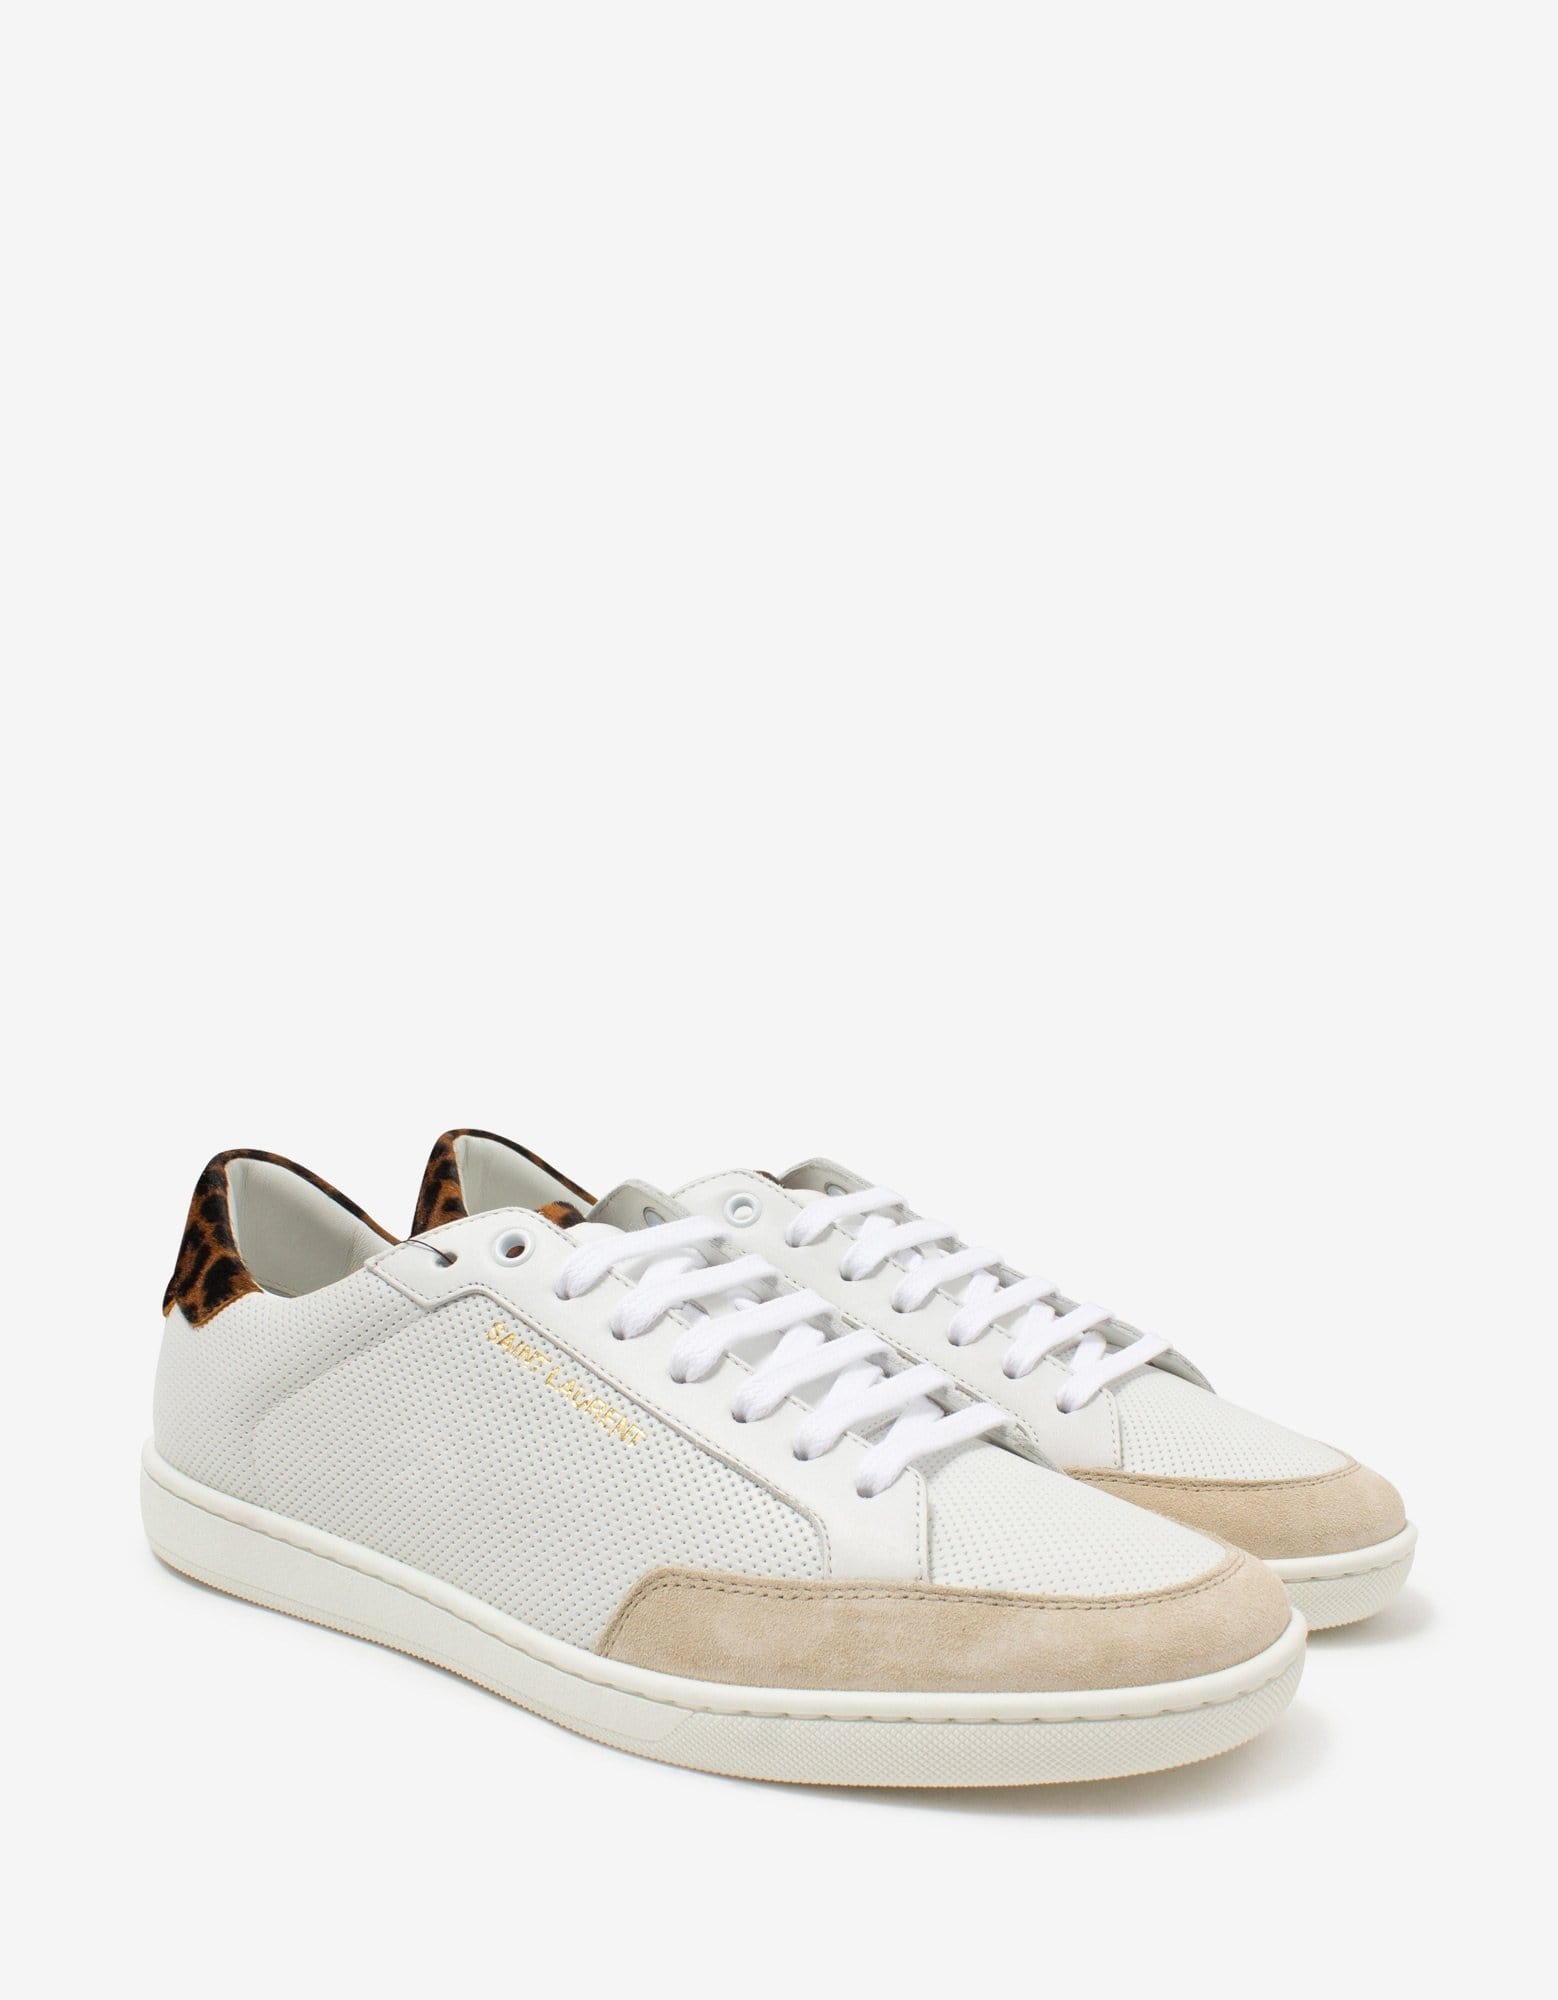 Court Classic SL/10 White Perforated Leather Trainers - 1